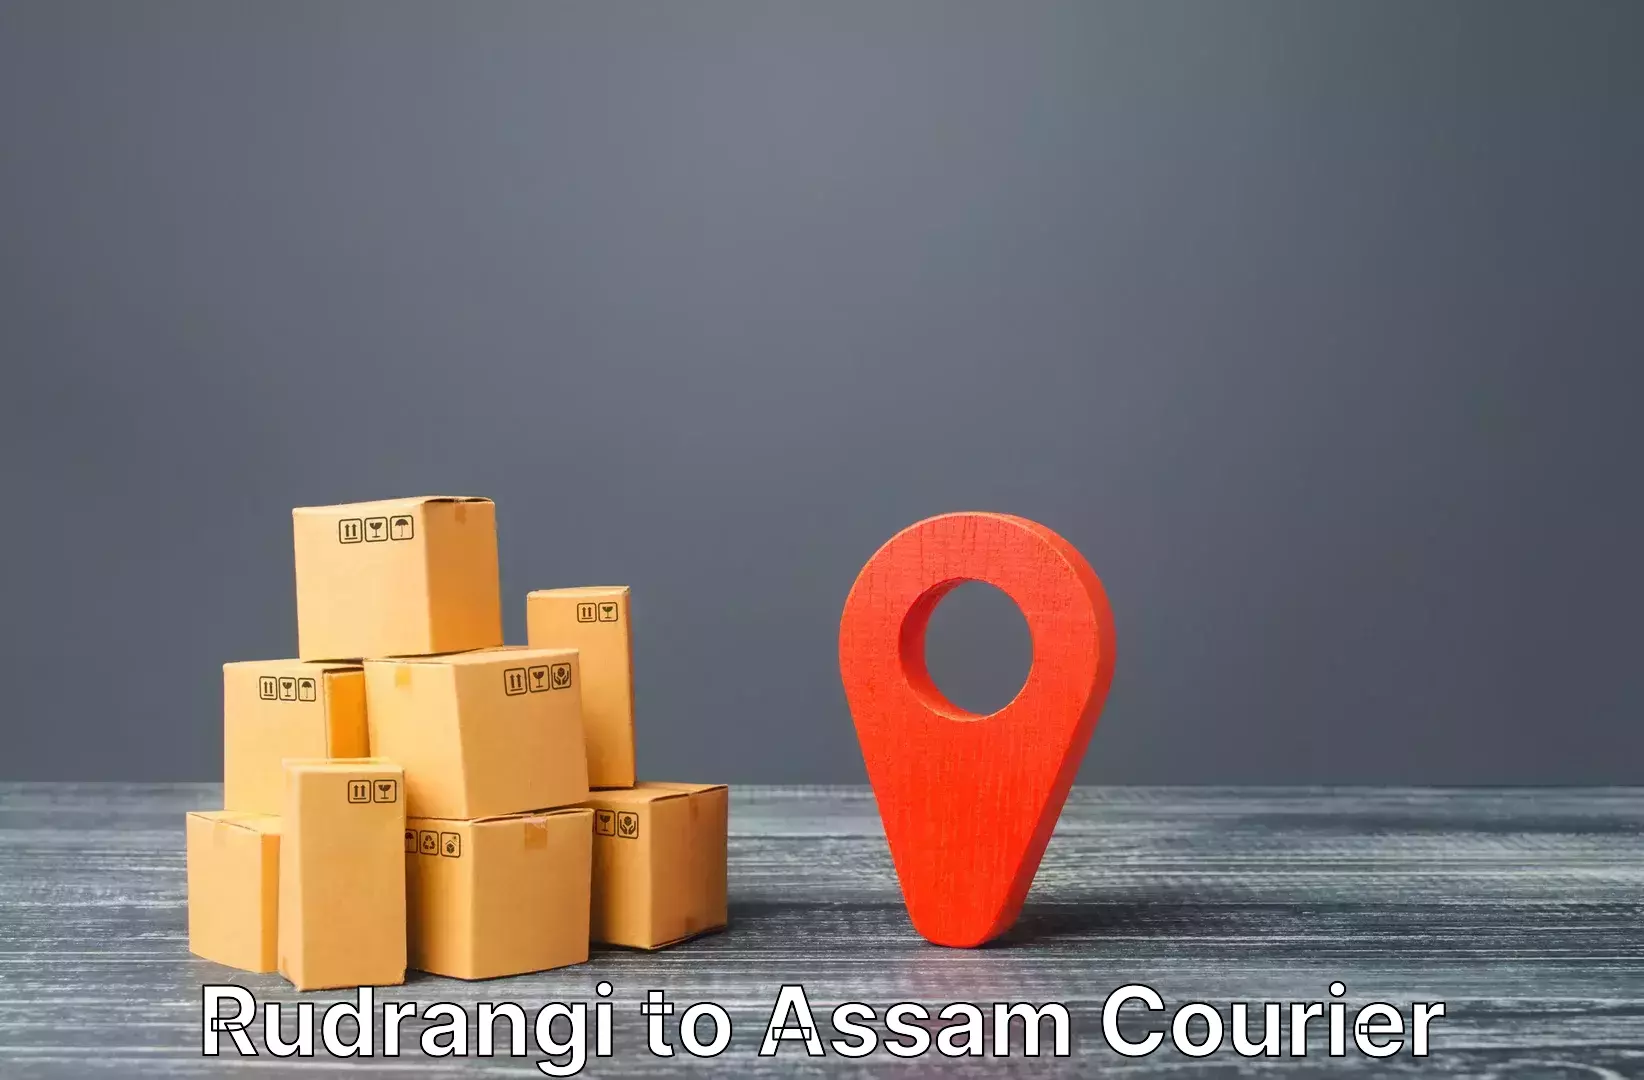 Luggage shipping specialists Rudrangi to Silapathar